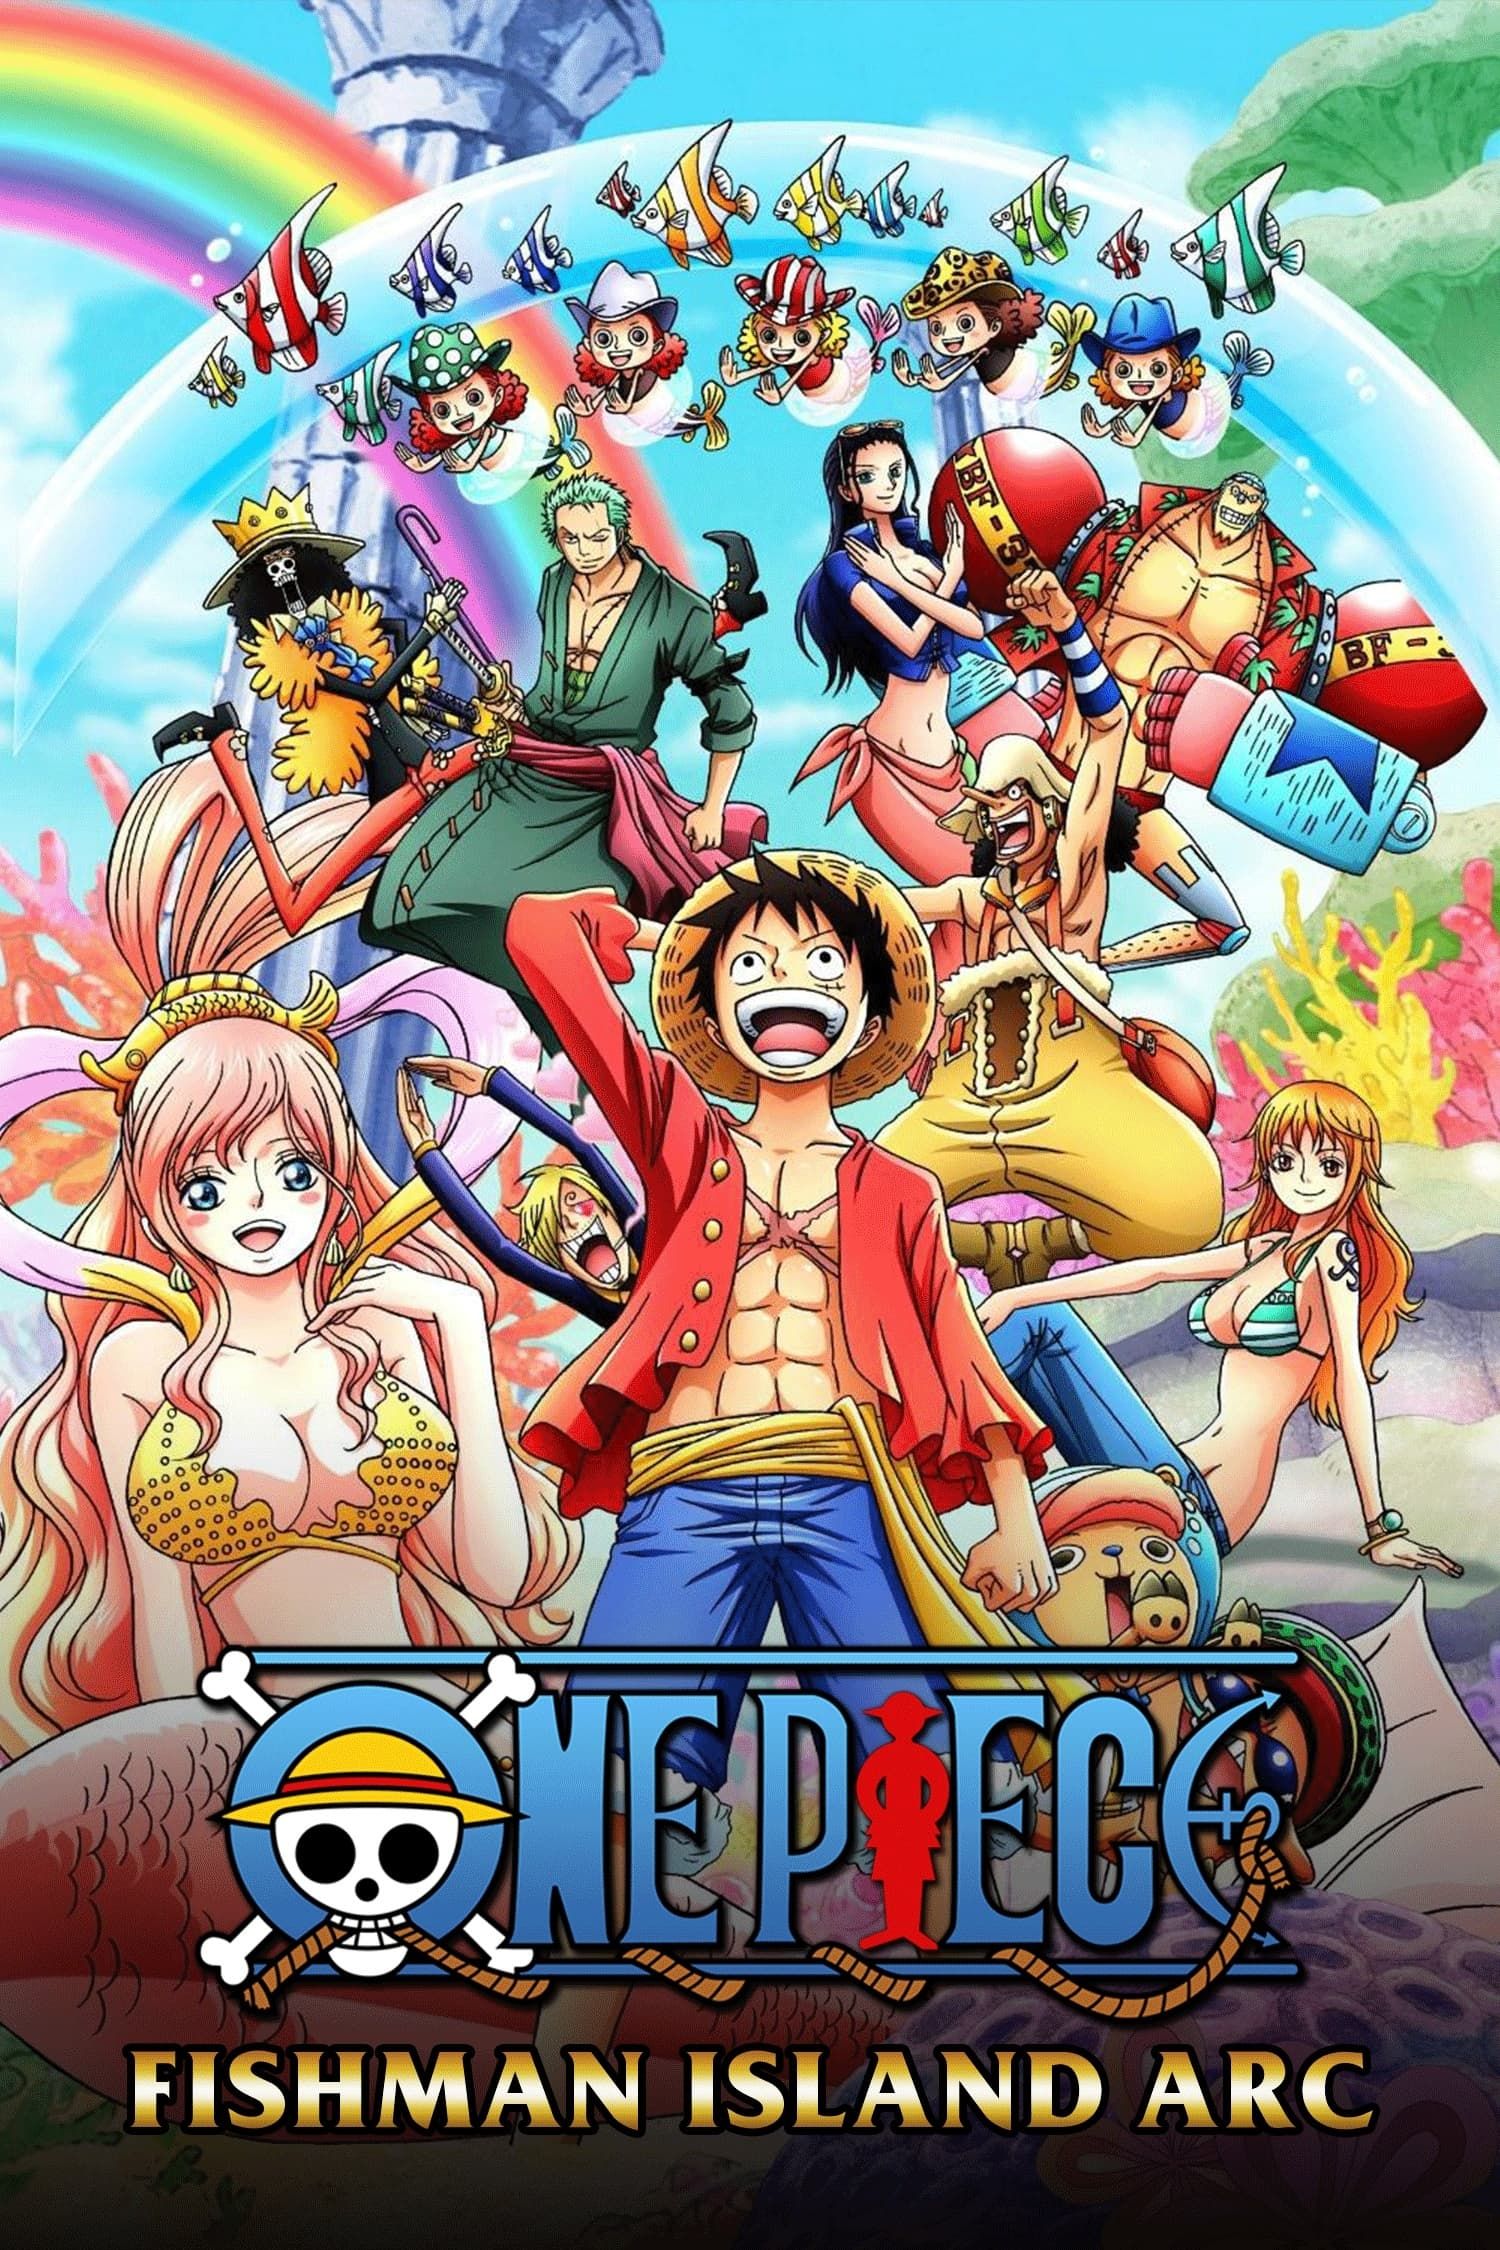 One Piece Episode of Luffy Ads, Film Z Ad & Cast Messages Posted - News -  Anime News Network